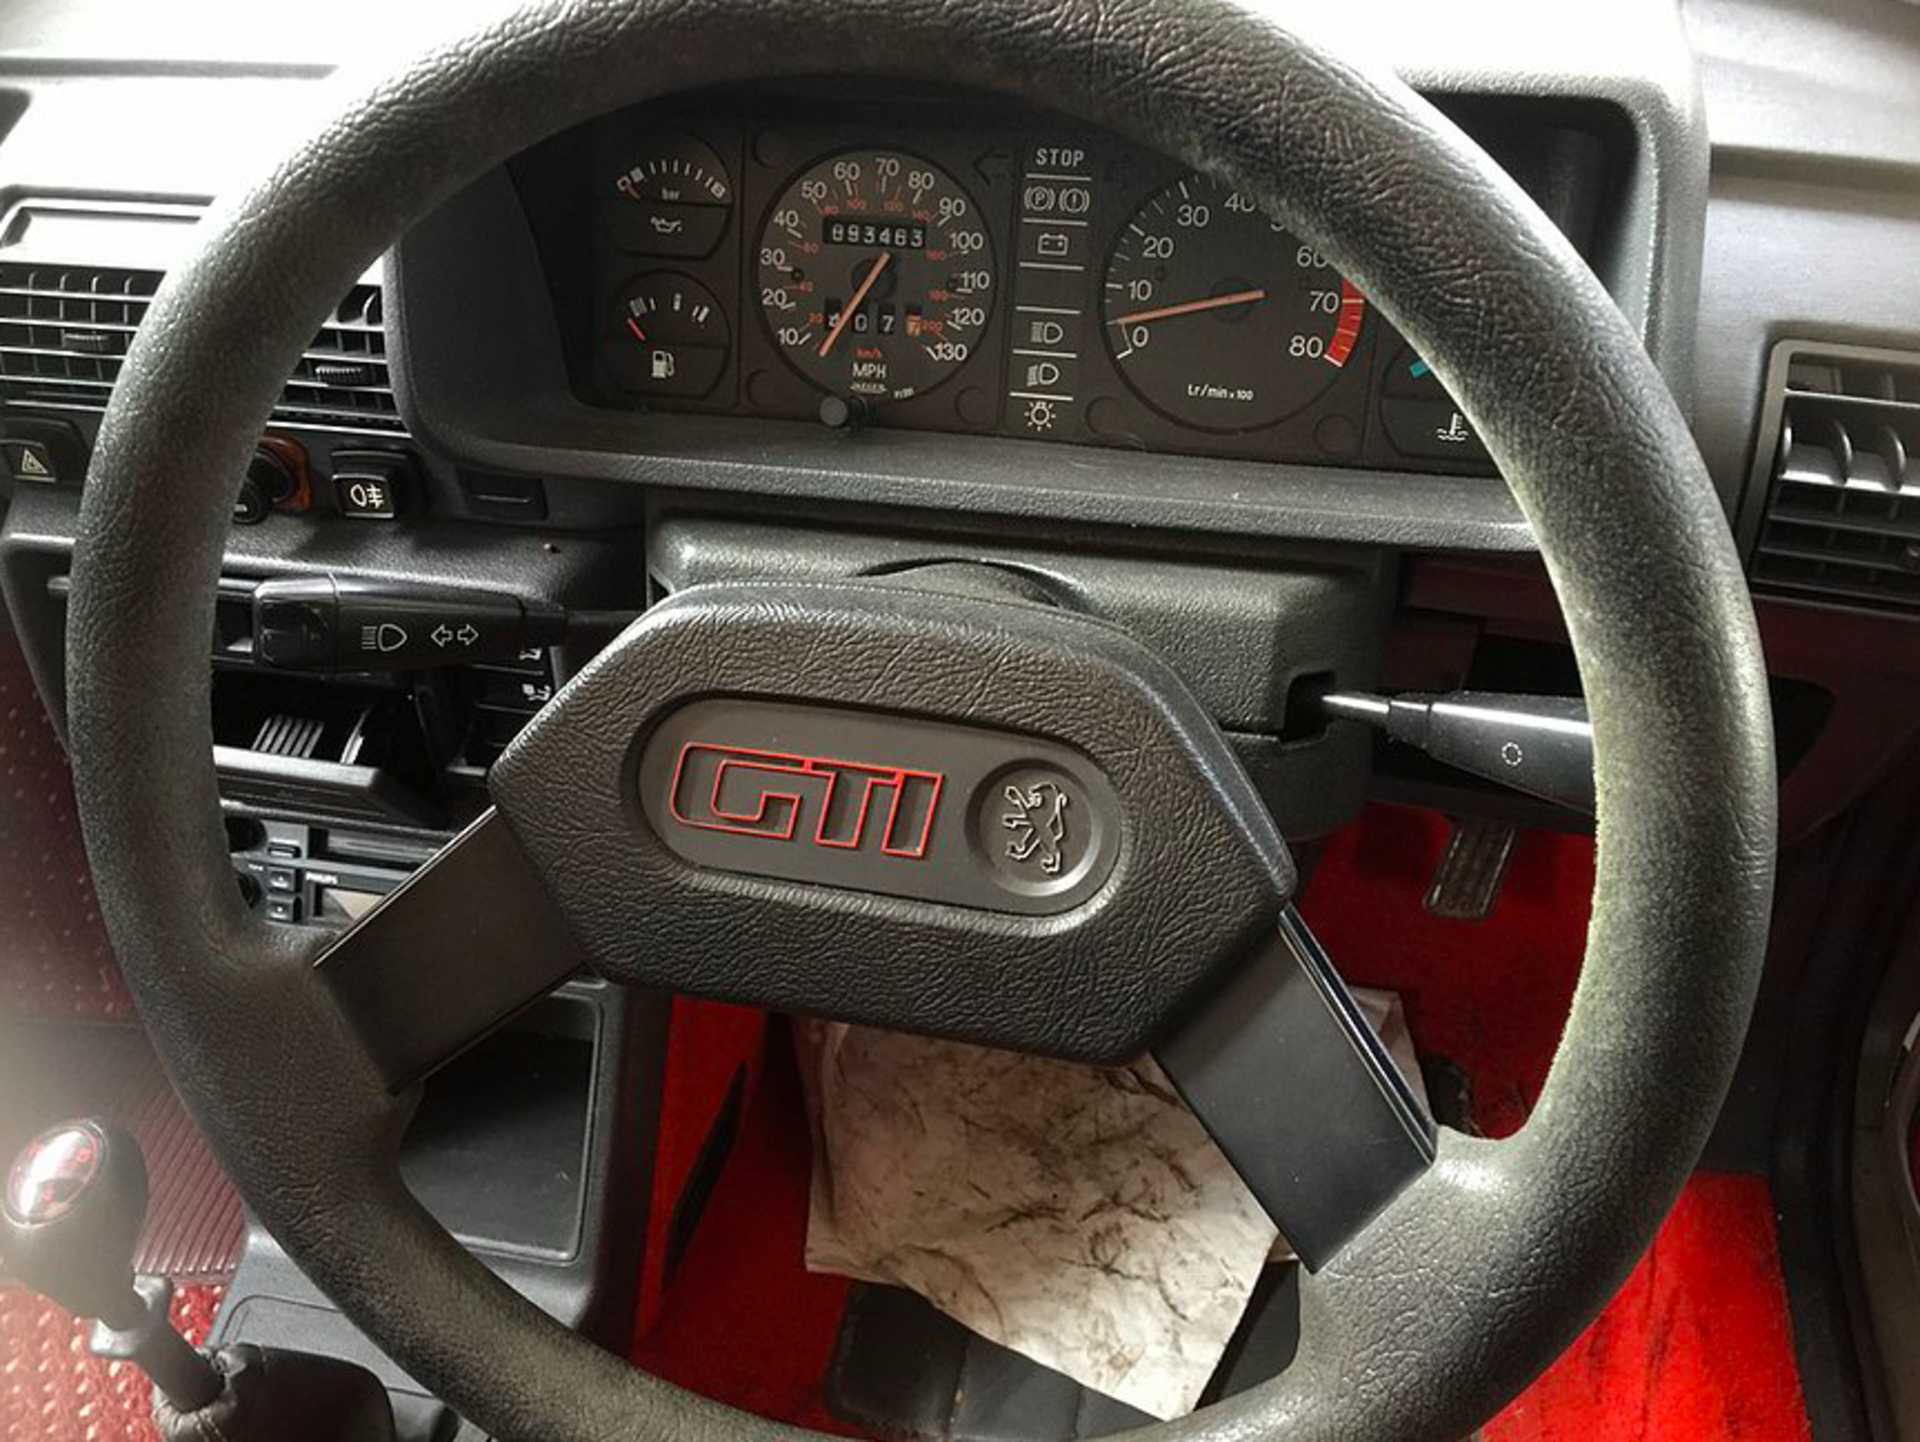 1985 Peugeot 205 GTI Phase 1 1.6 - Image 2 of 2